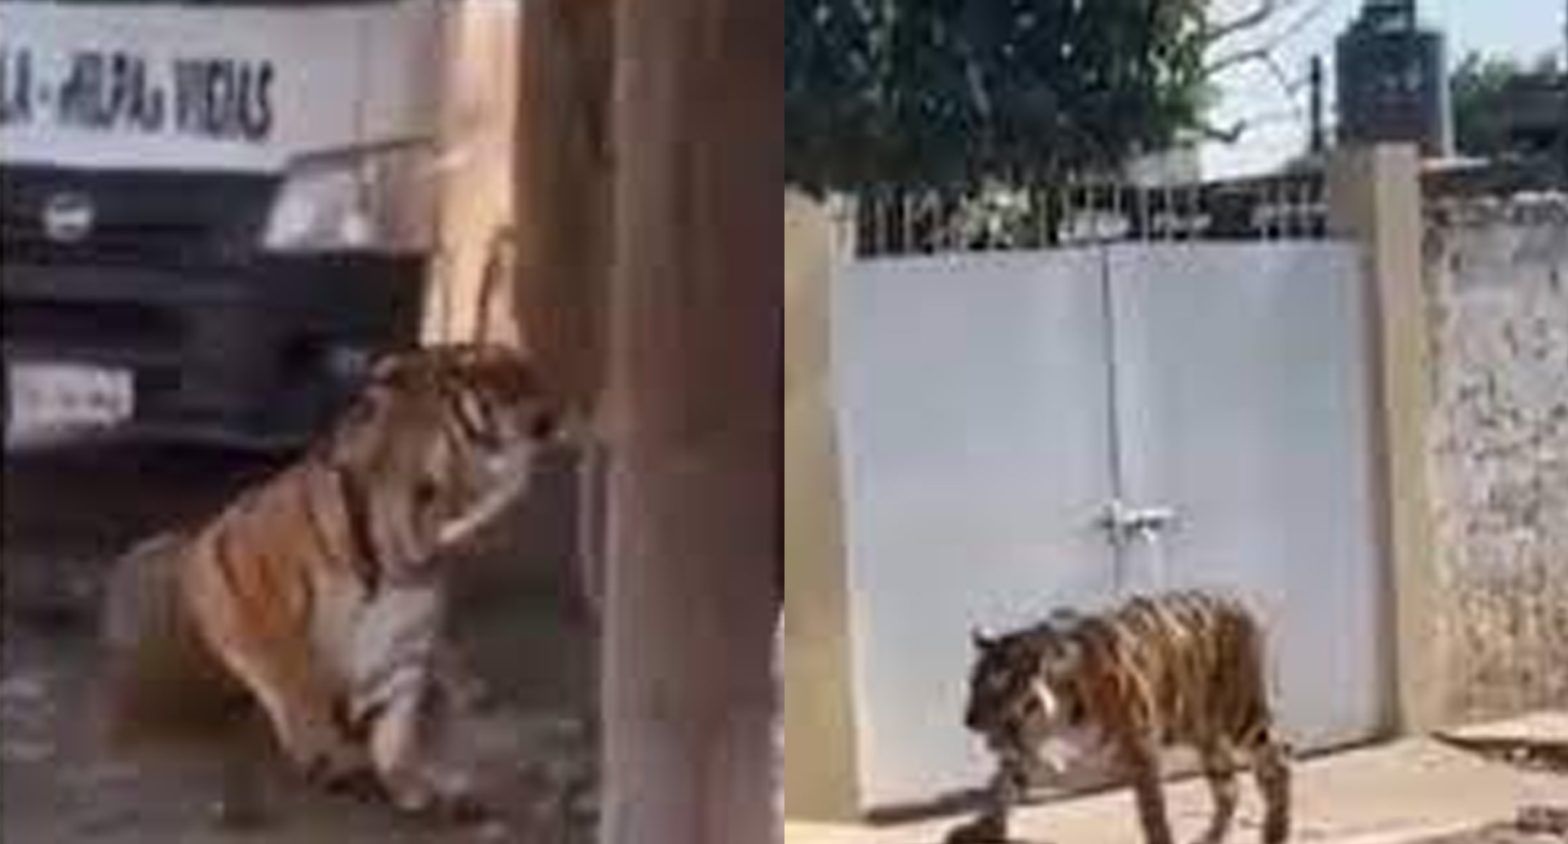 Bengal tiger sitting in front of a truck; Bengal tiger walking on the road